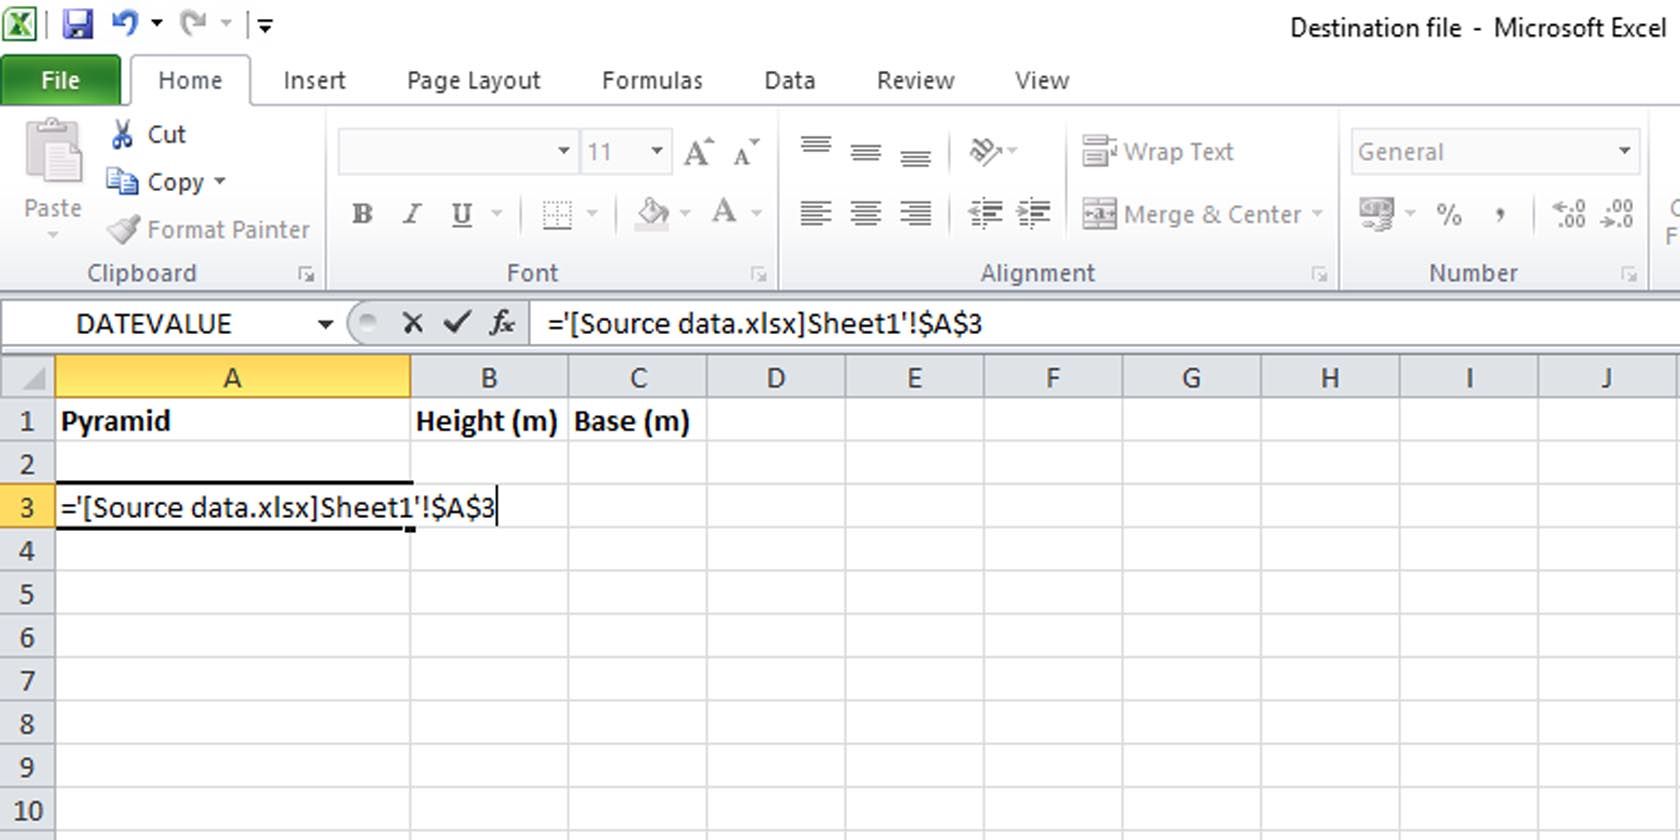 Excel destination file for data to be imported